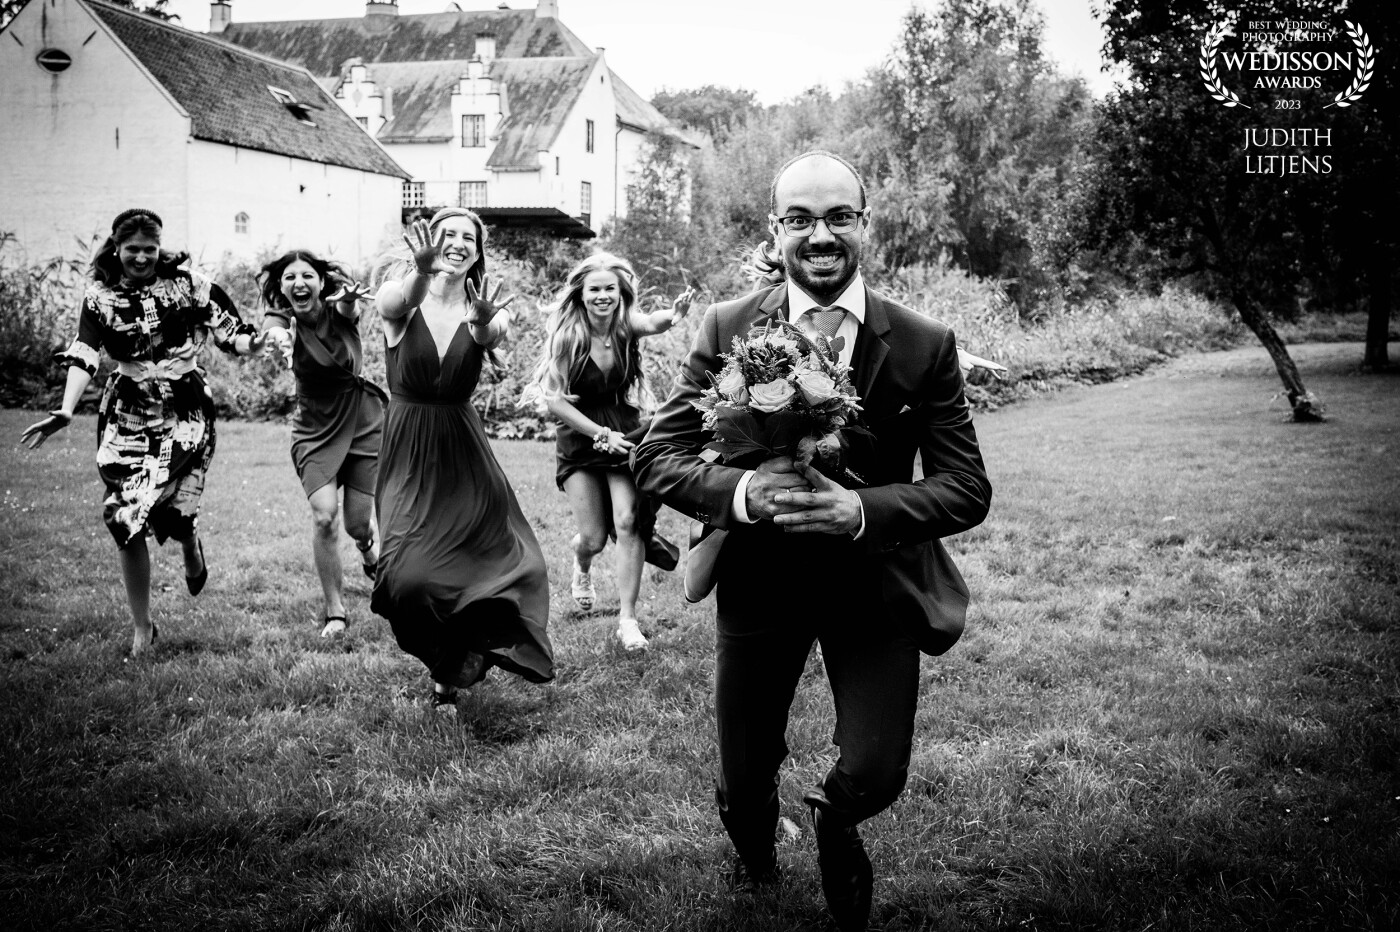 What could be more fun than having fun at a wedding with a group of friends?  All after the groom.